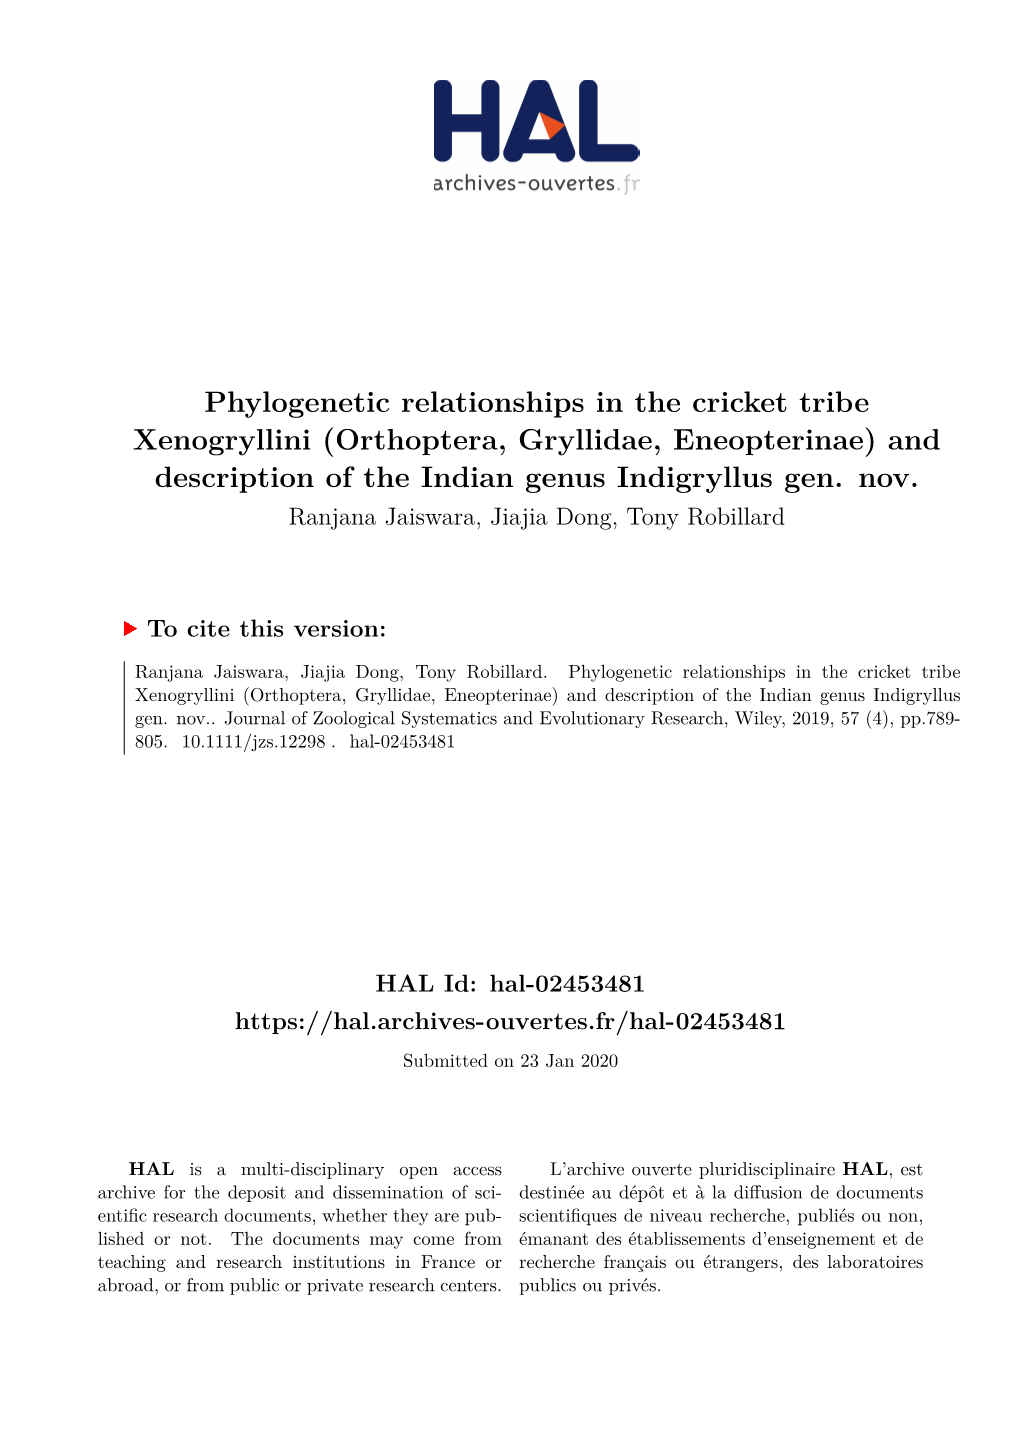 Phylogenetic Relationships in the Cricket Tribe Xenogryllini (Orthoptera, Gryllidae, Eneopterinae) and Description of the Indian Genus Indigryllus Gen